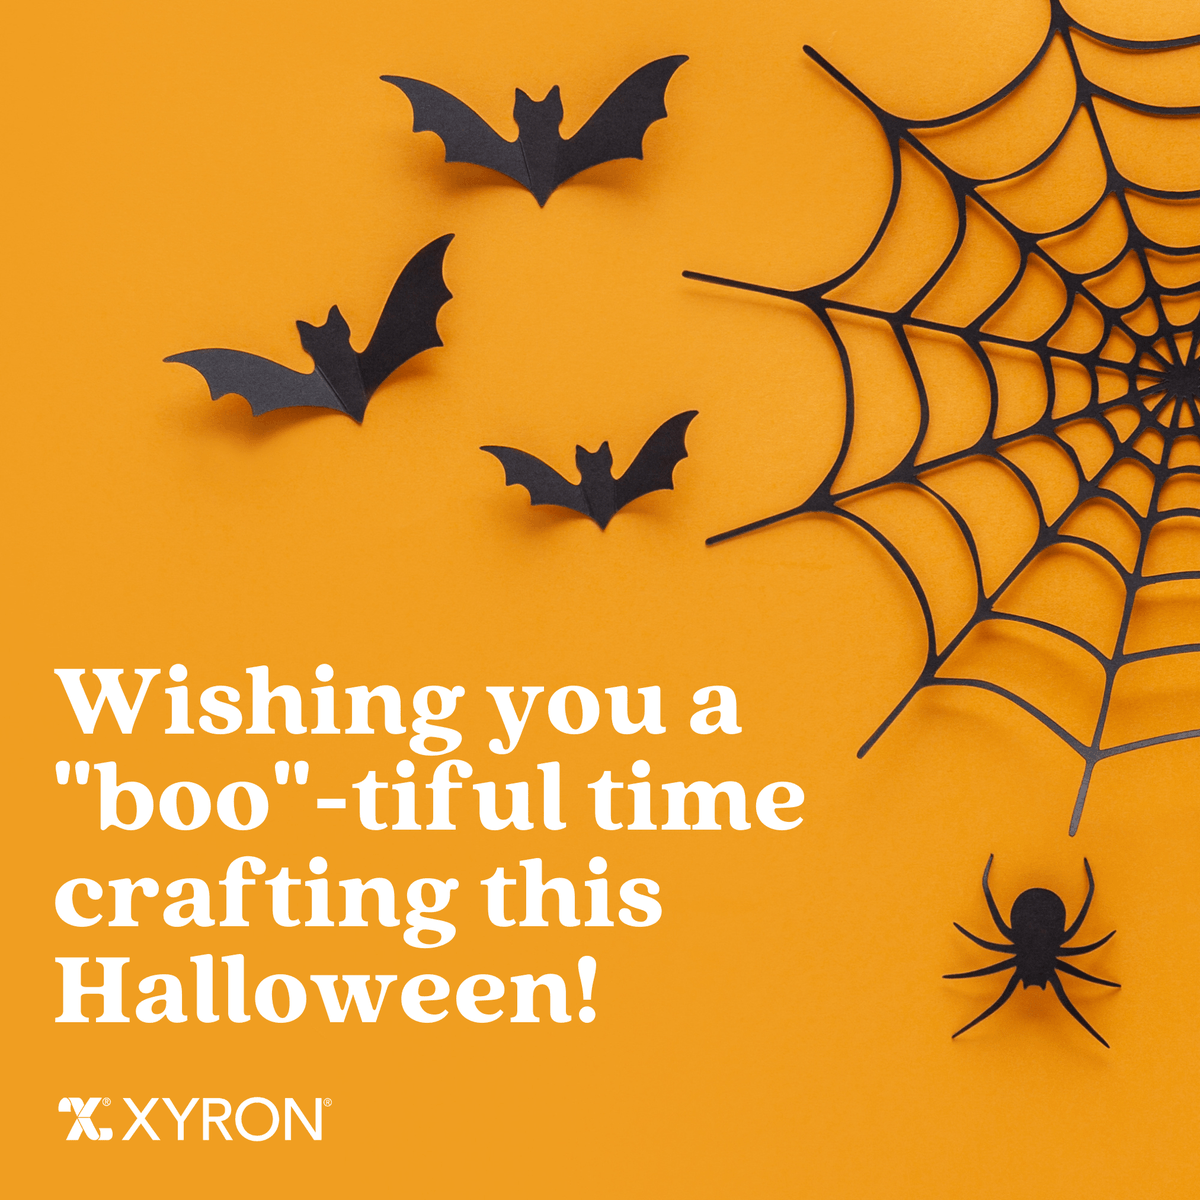 Crafting up some Halloween magic! Wishing all our Xyron® crafters a frightfully fun and creatively spooky Halloween!

#craftwithxyron #xyron #spookyseason #halloween #craftlover #crafted 
#spookycrafts #halloweencrafts #xyronstickstogether  #createwithxyron